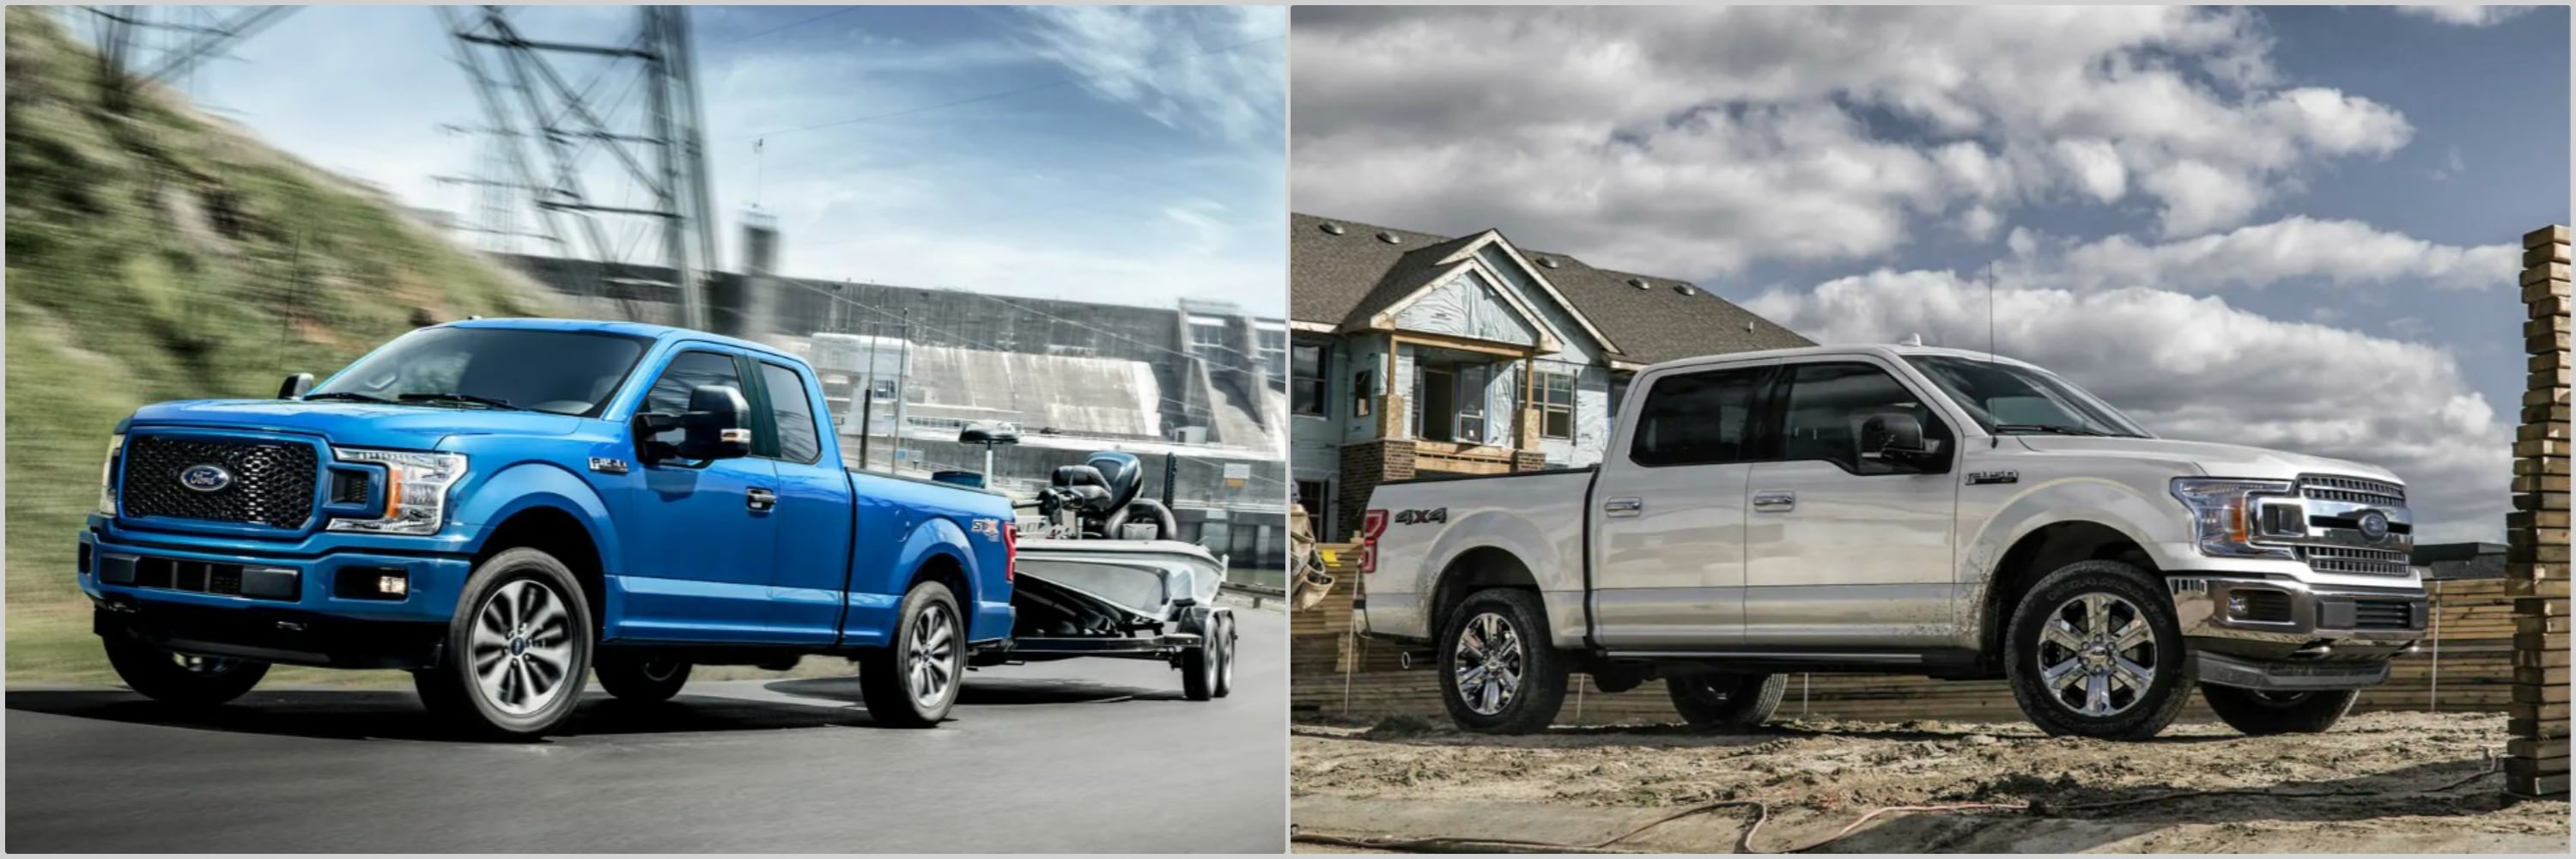 comparing the 2021 Ford F-150 to the 2020 model